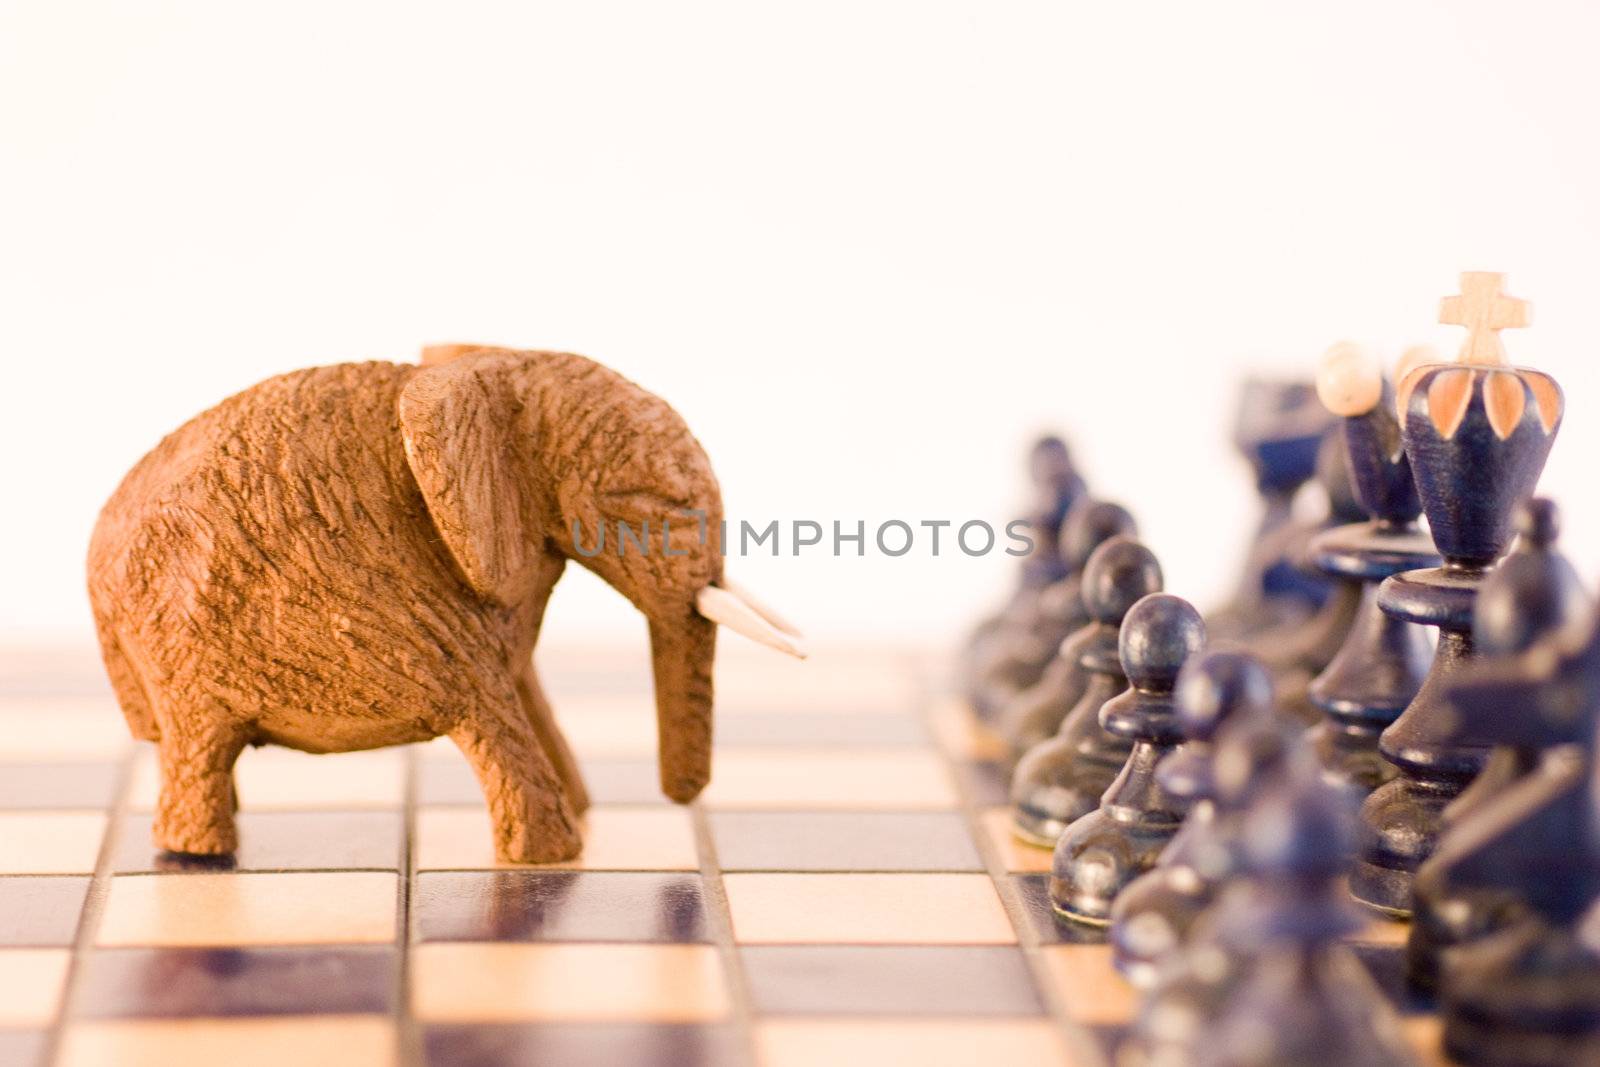 Conceptual with wood chess pieces